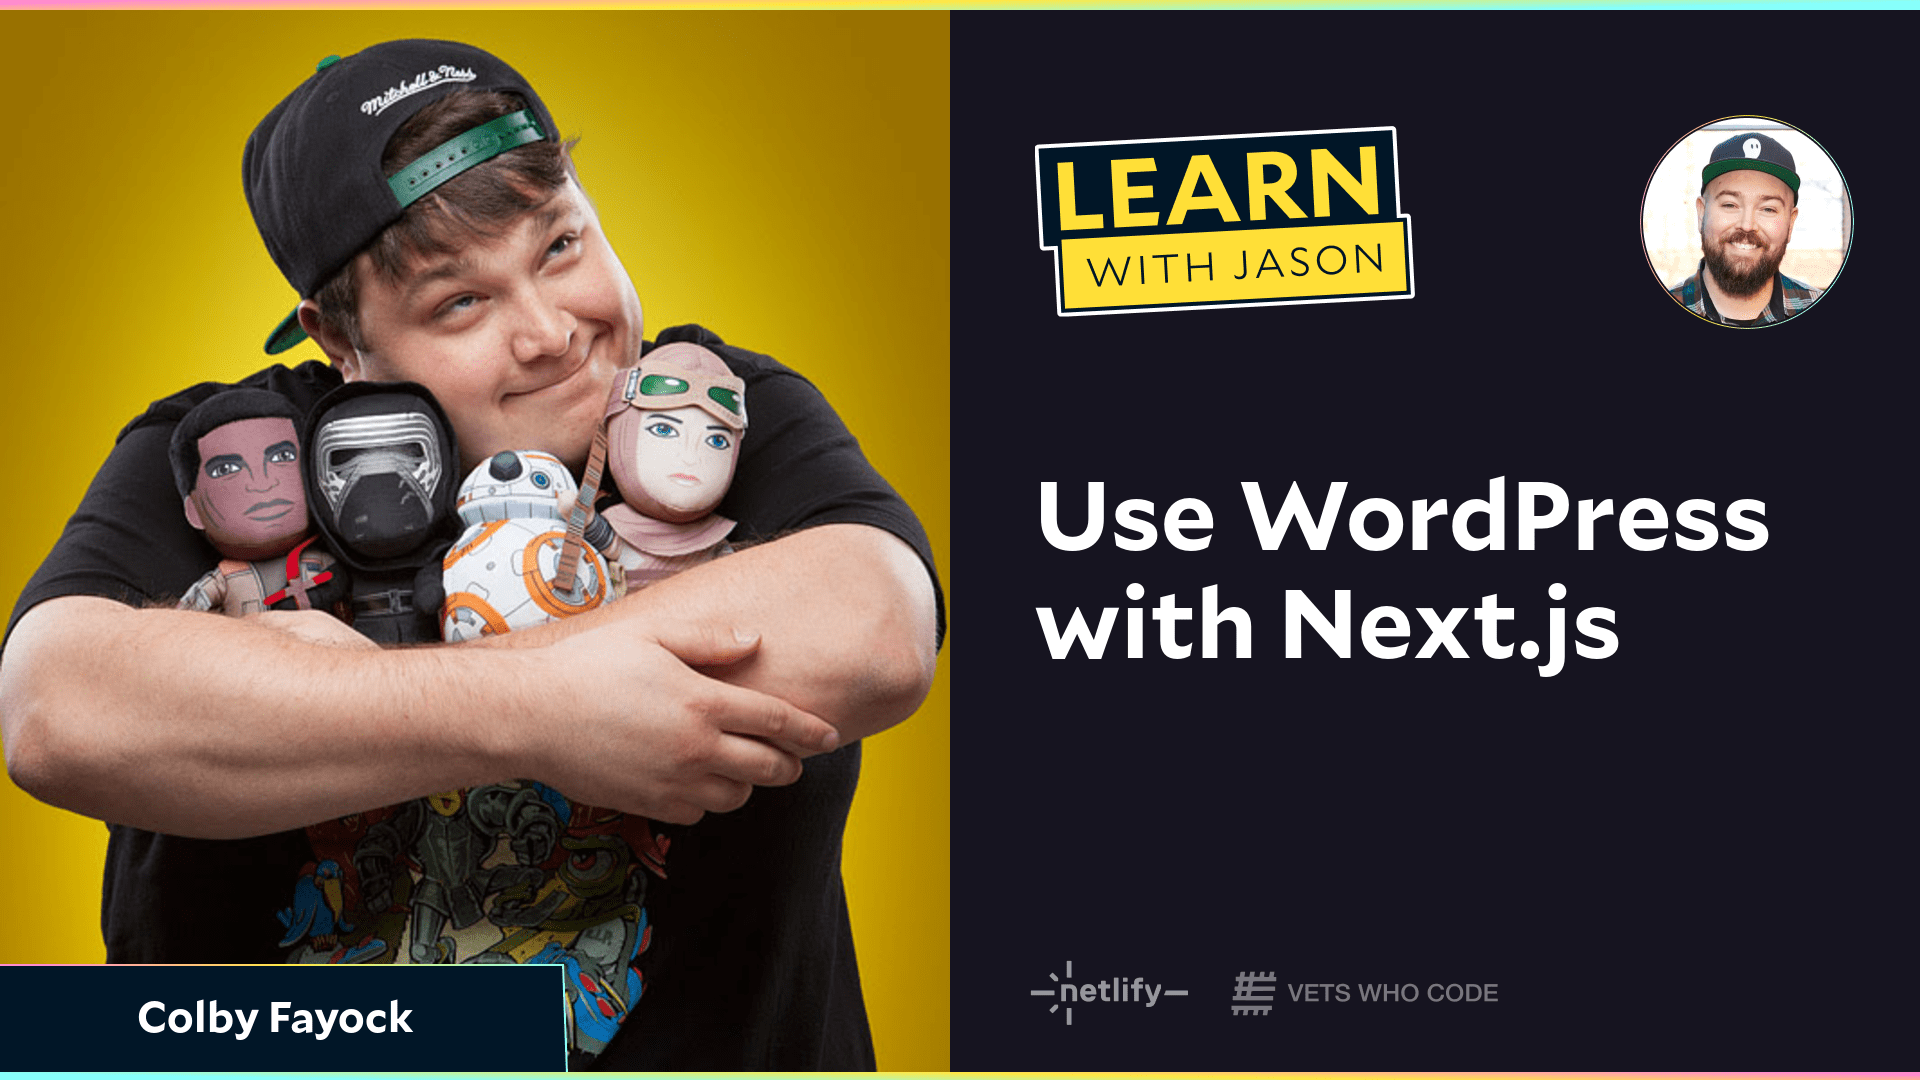 Use WordPress with Next.js (with Colby Fayock)